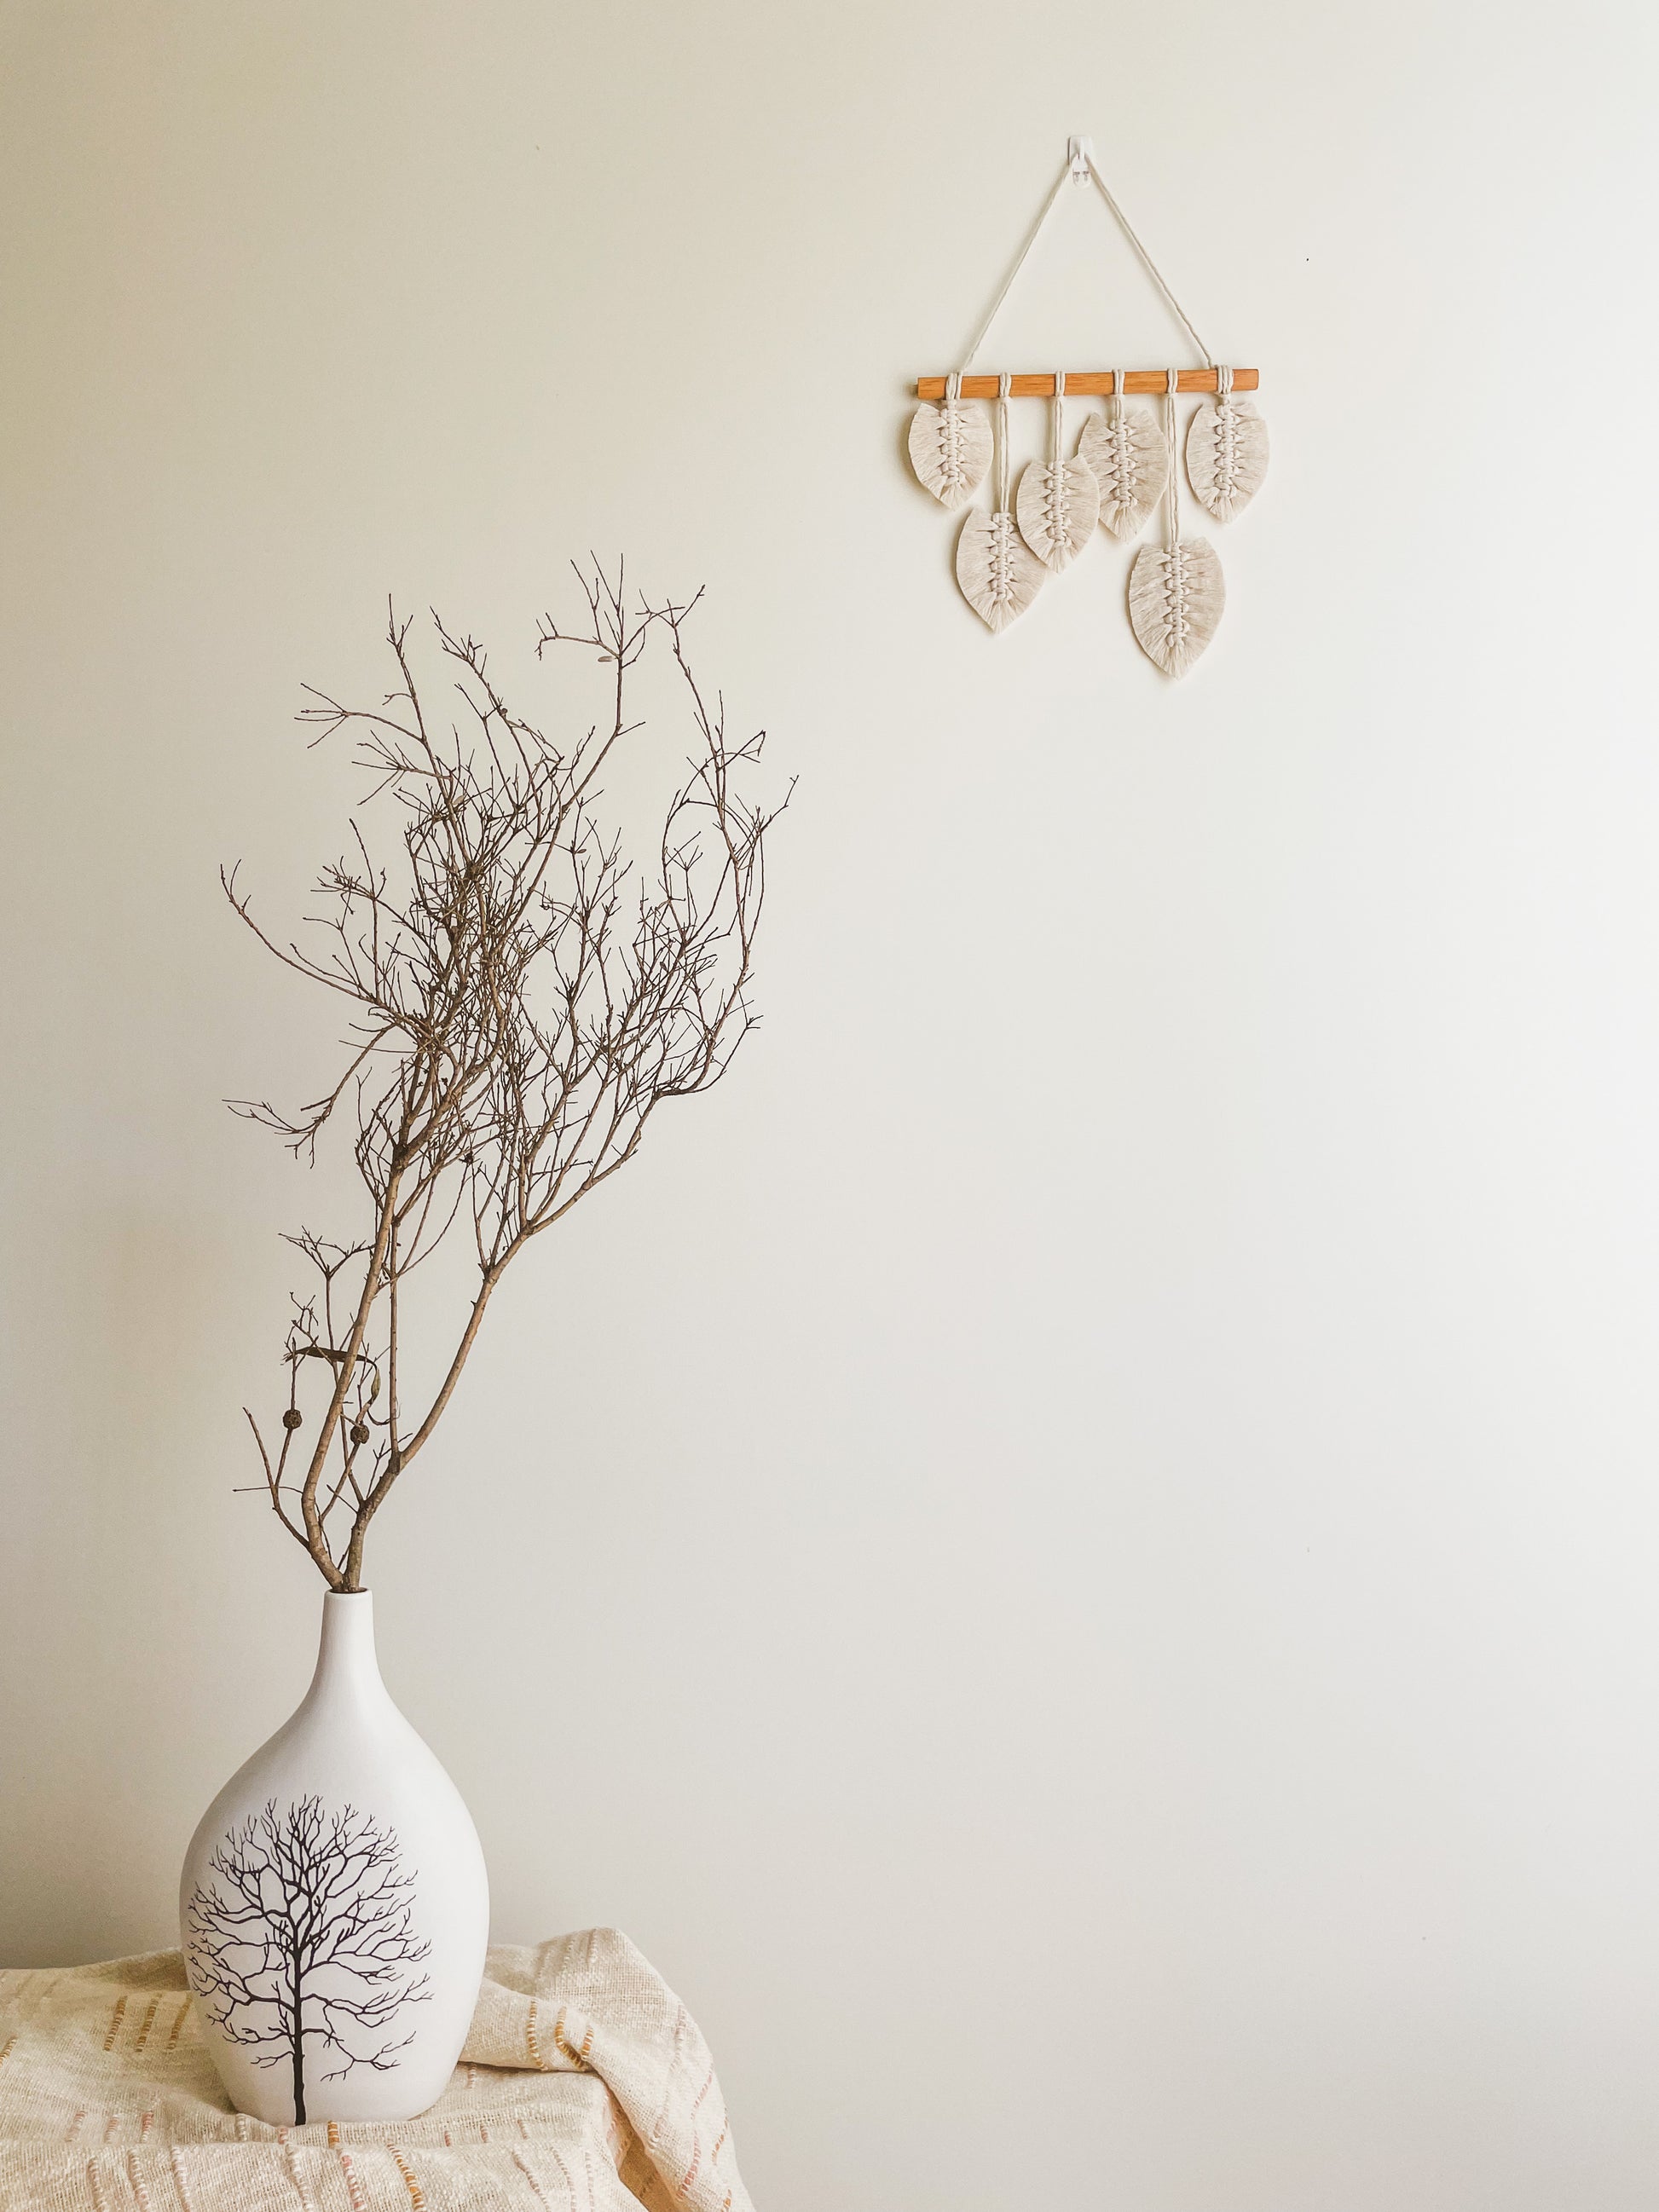 Sunshine macrame leaves hanging hanged on a wall. Ceramic vase placed next to it with a dried branch from a tree